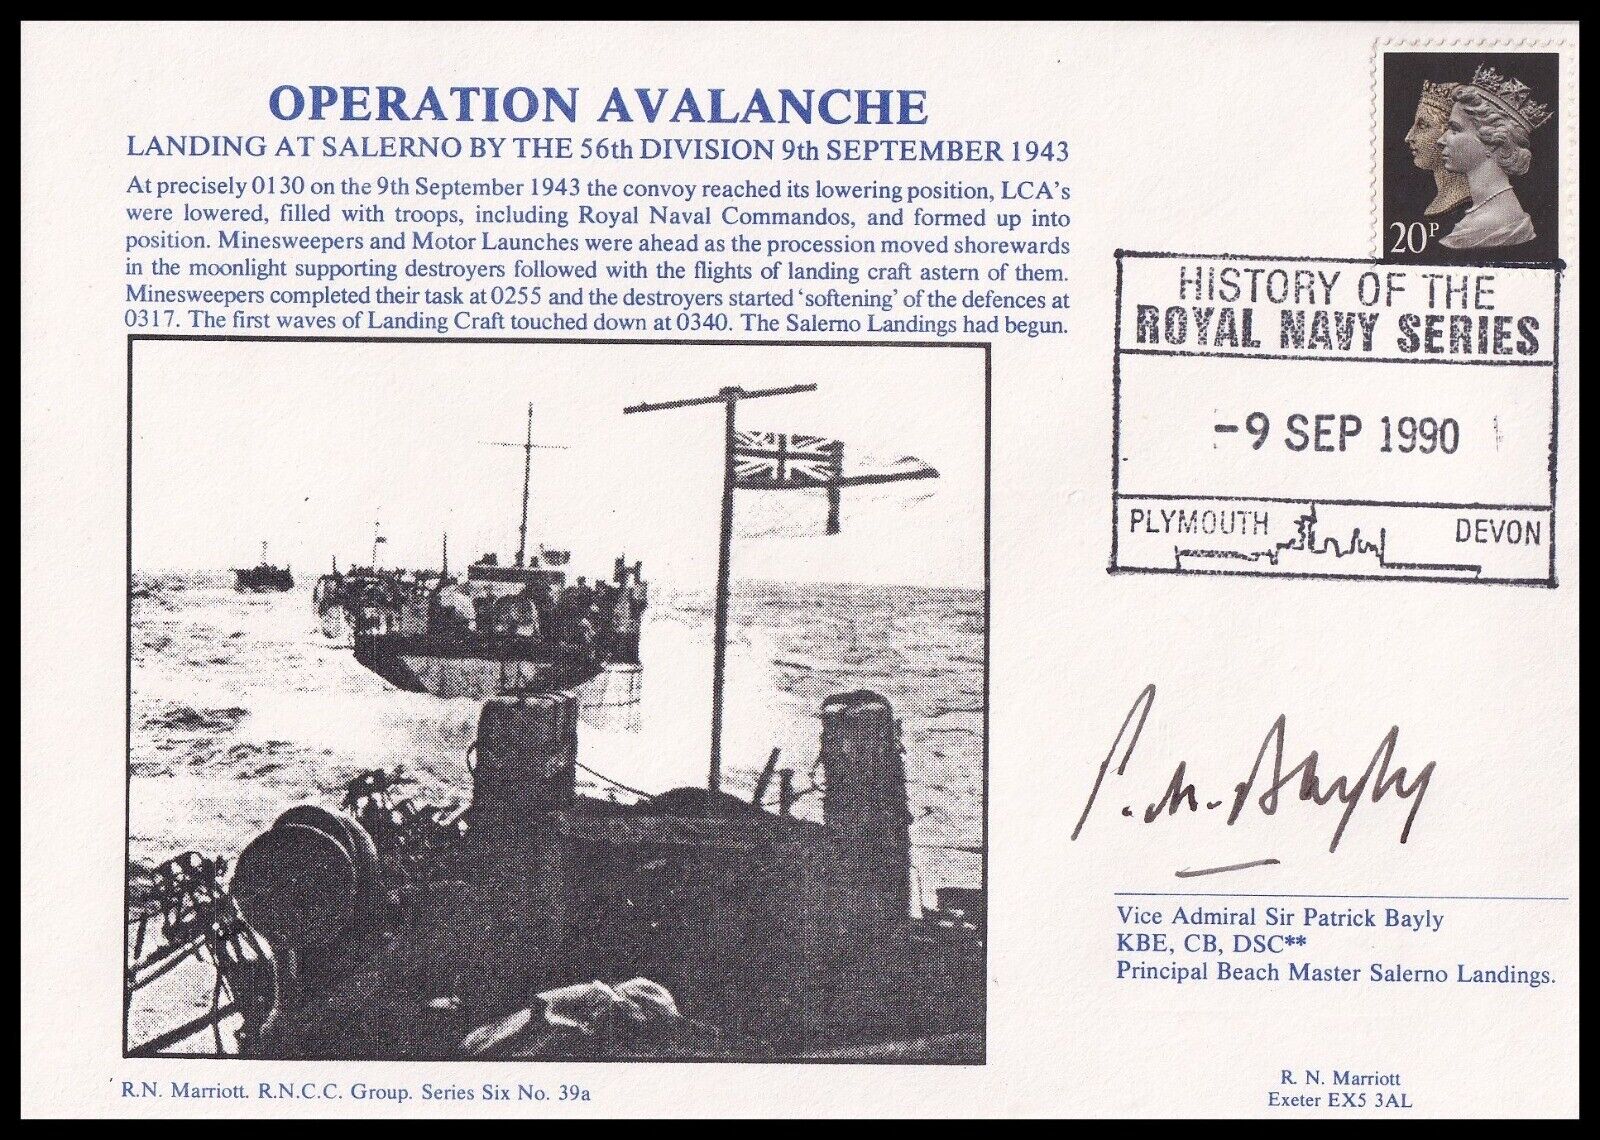 Operation Avalanche Marriott Navy Cover Signed Beach Master SIR PATRICK BAYLY